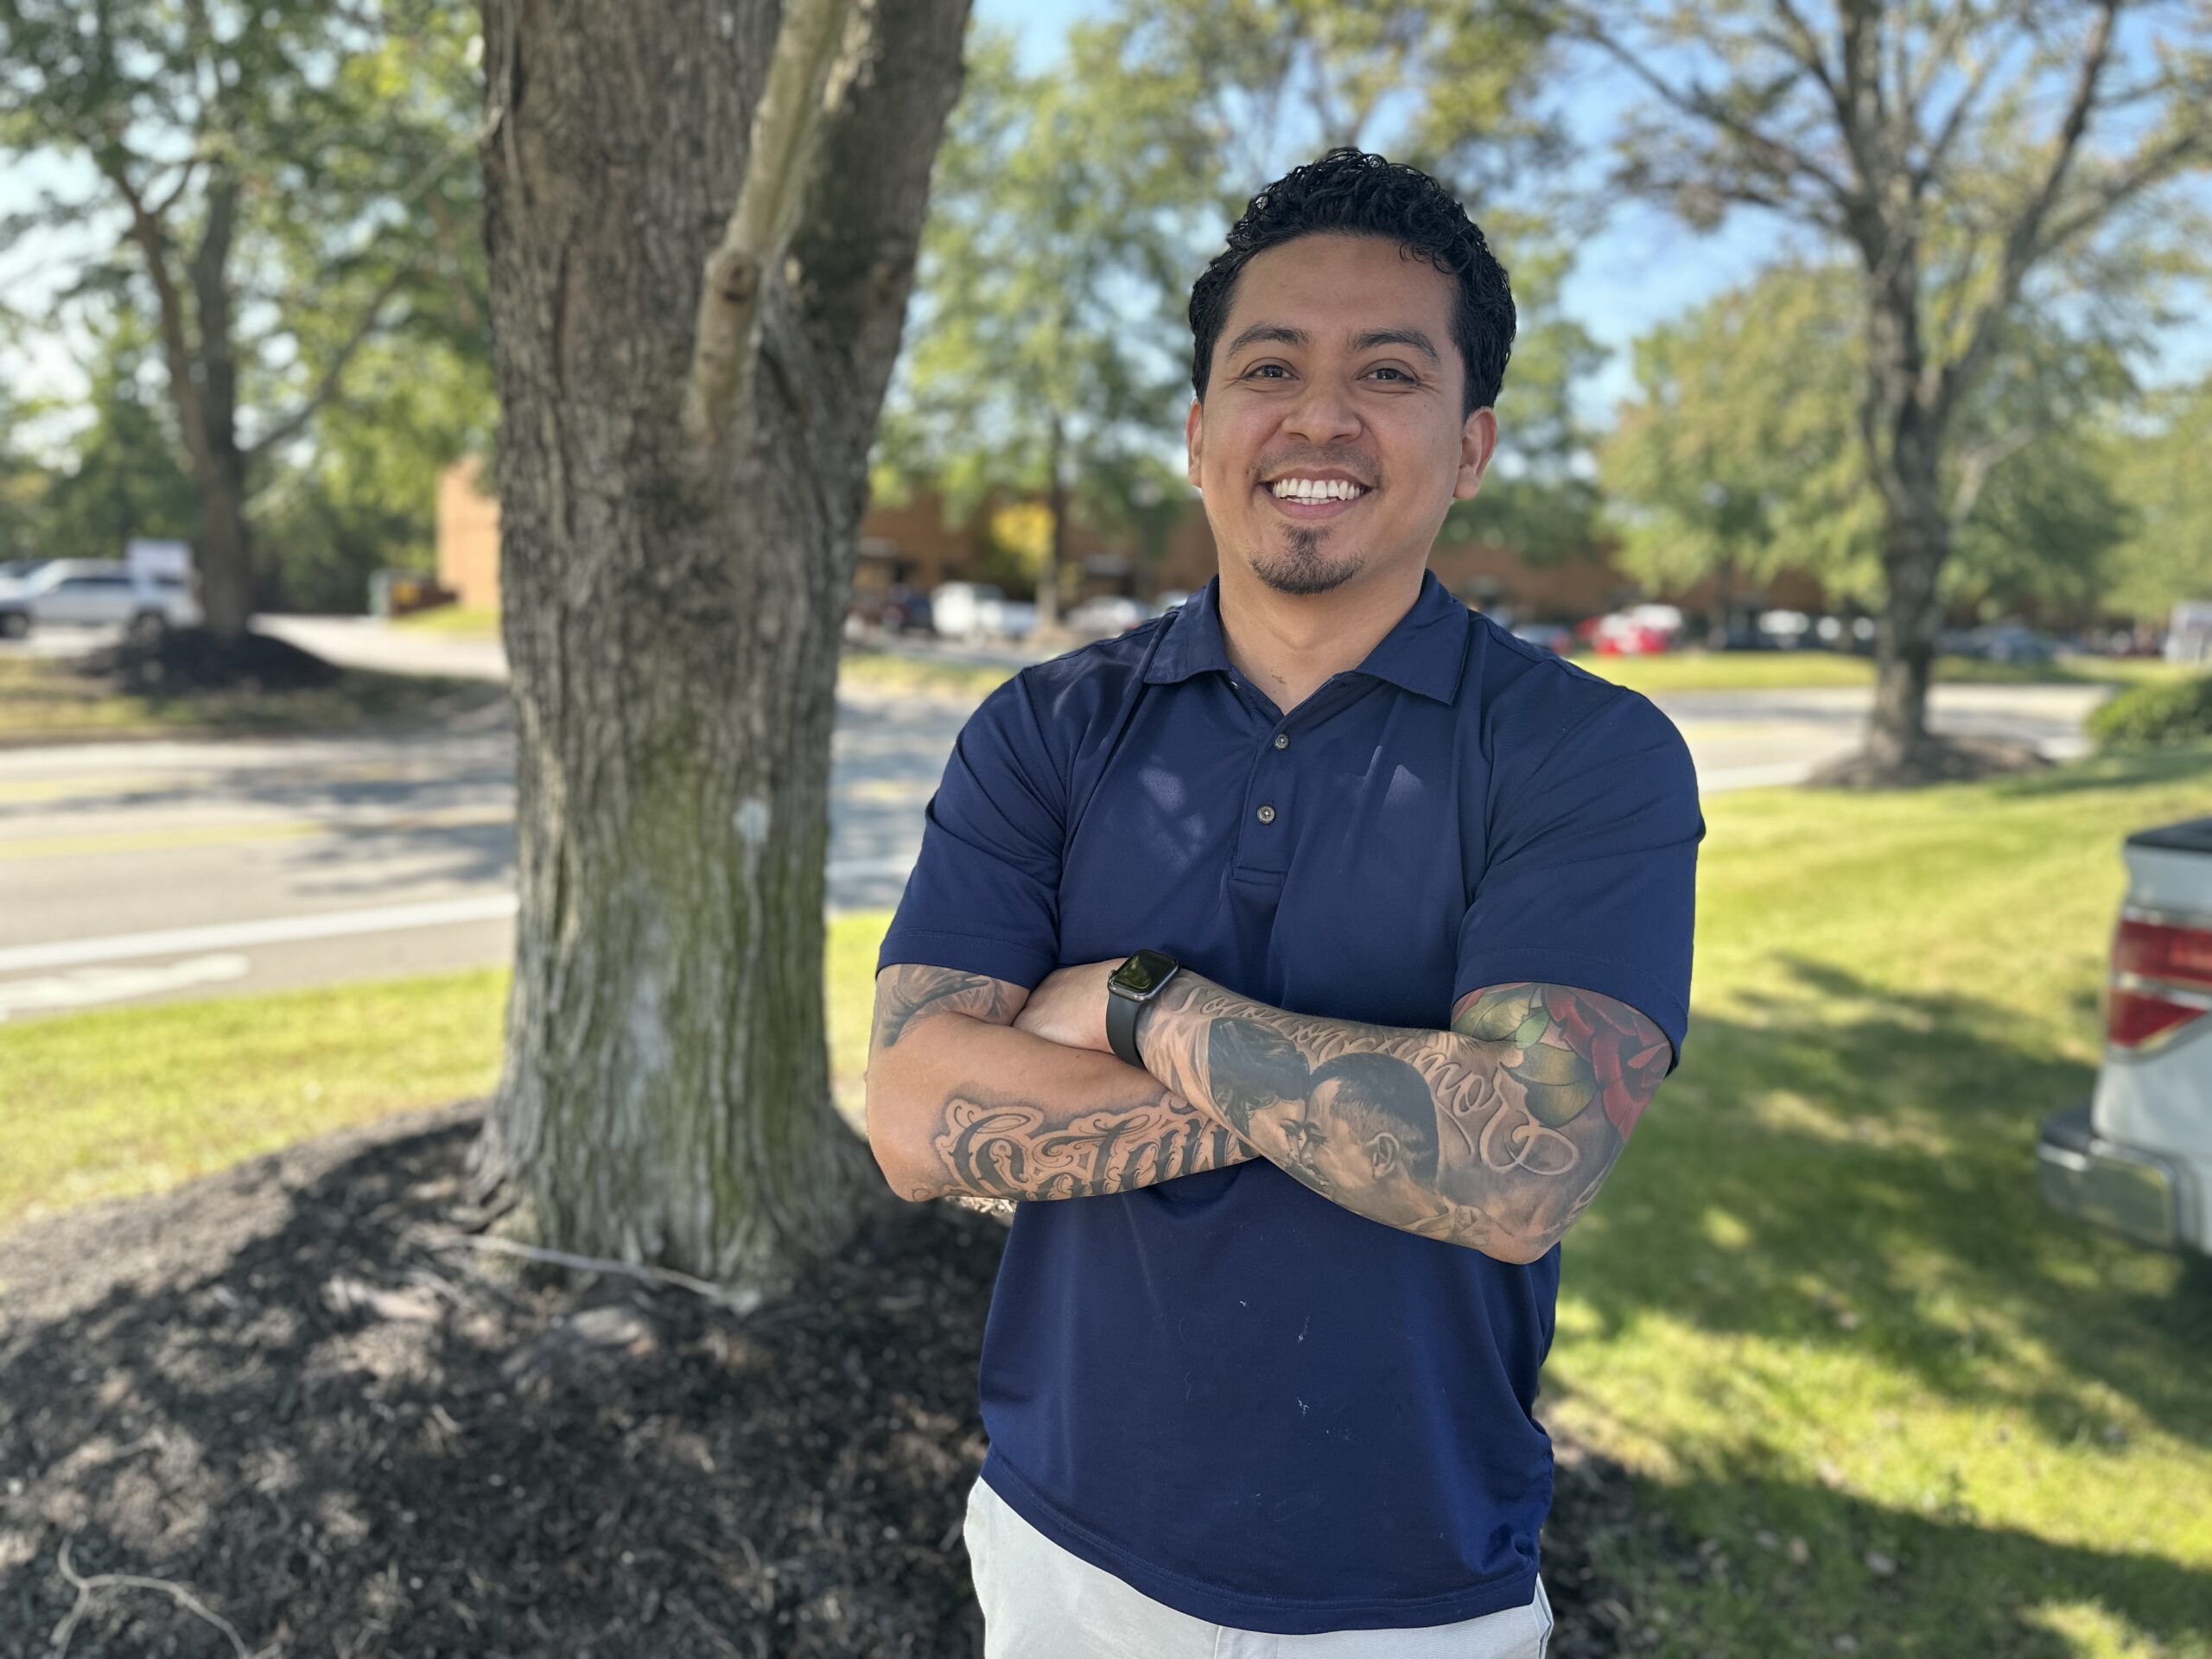 Carlos is dressed in a navy blue polo and light khaki pants and standing proudly against the backdrop of a tall tree with his arms crossed displaying his intricate tattoos.